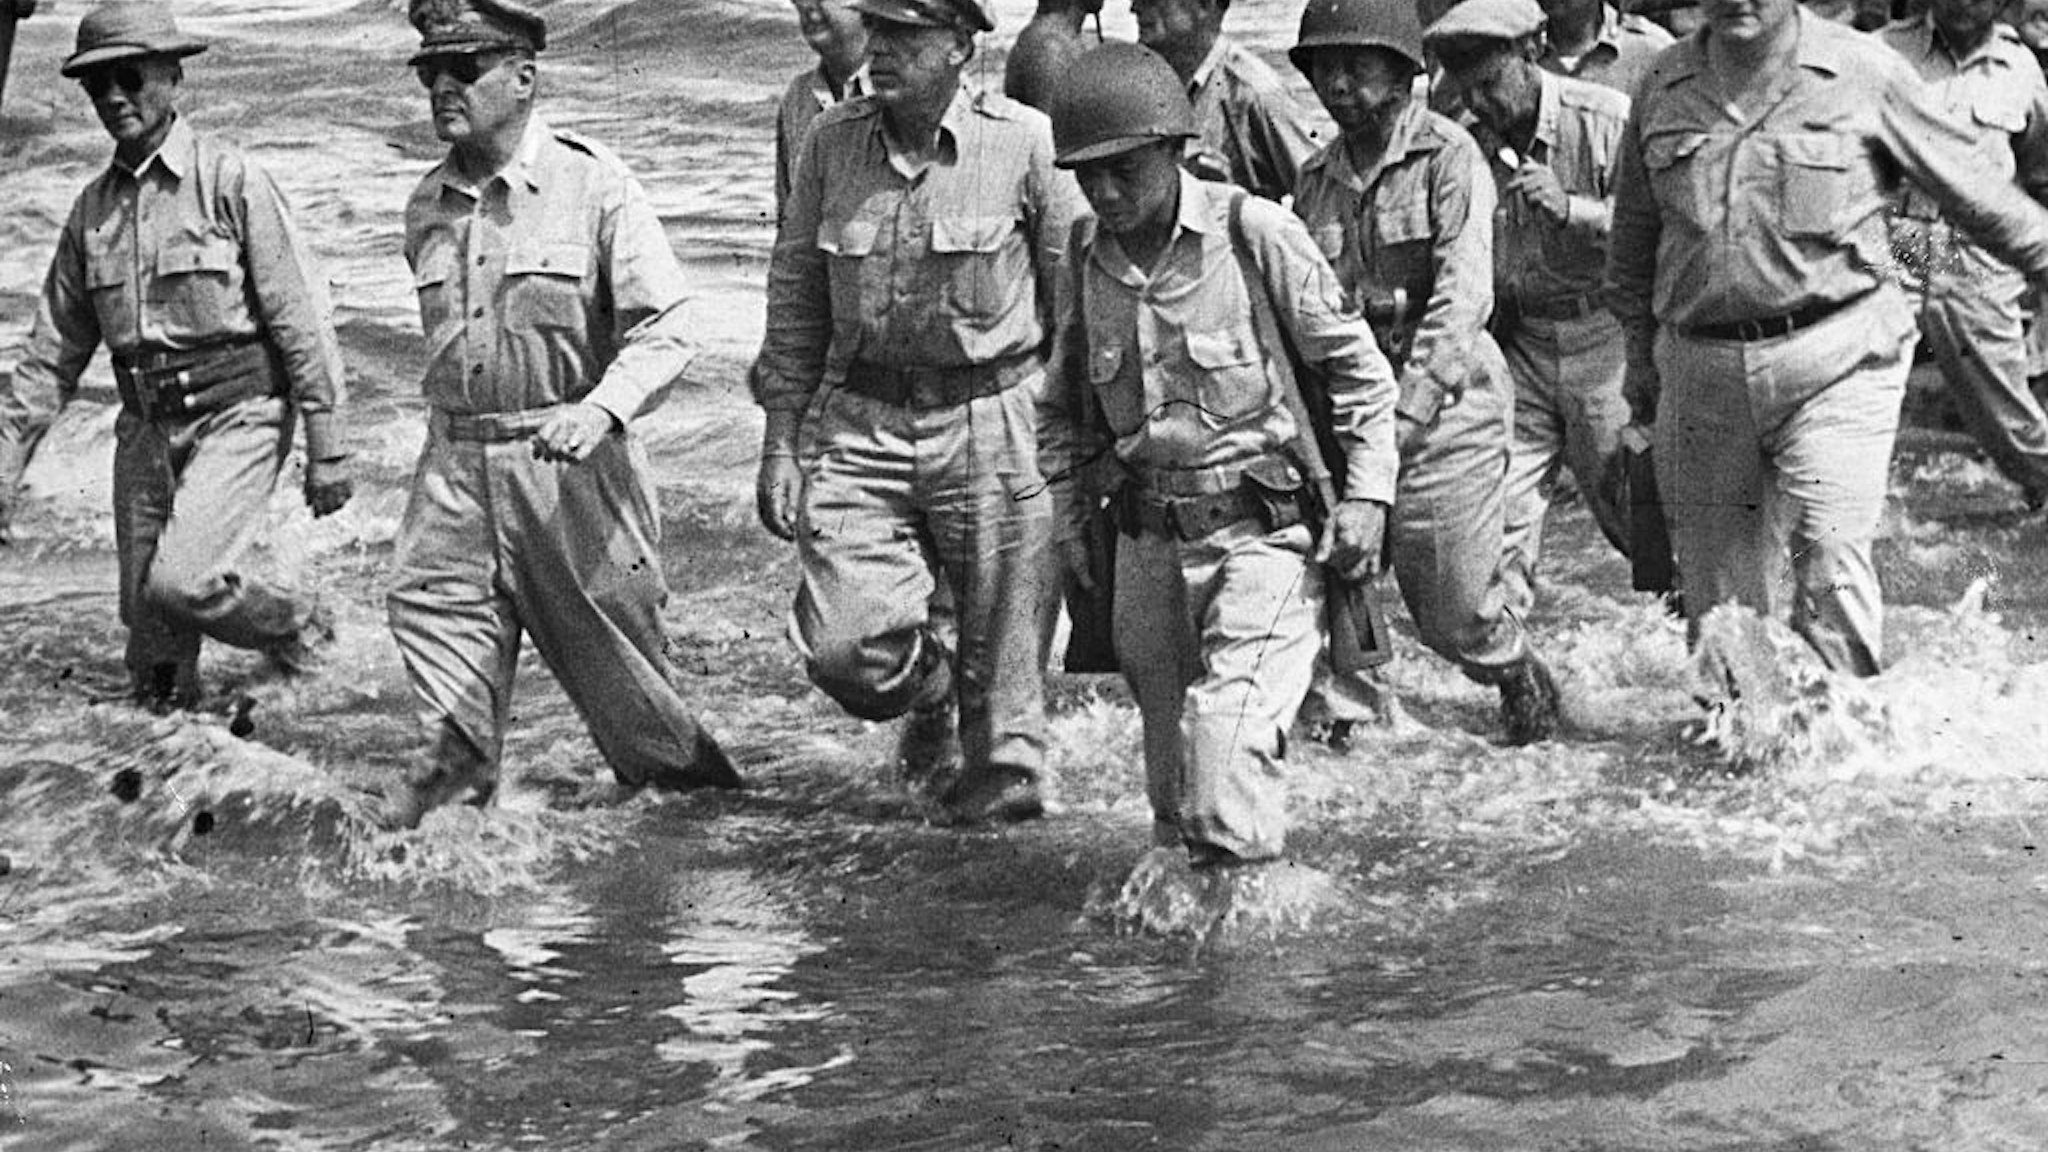 General Douglas MacArthur (second from left) walks to the shore of Leyte Island with a group of U.S. Army and Philippine officers